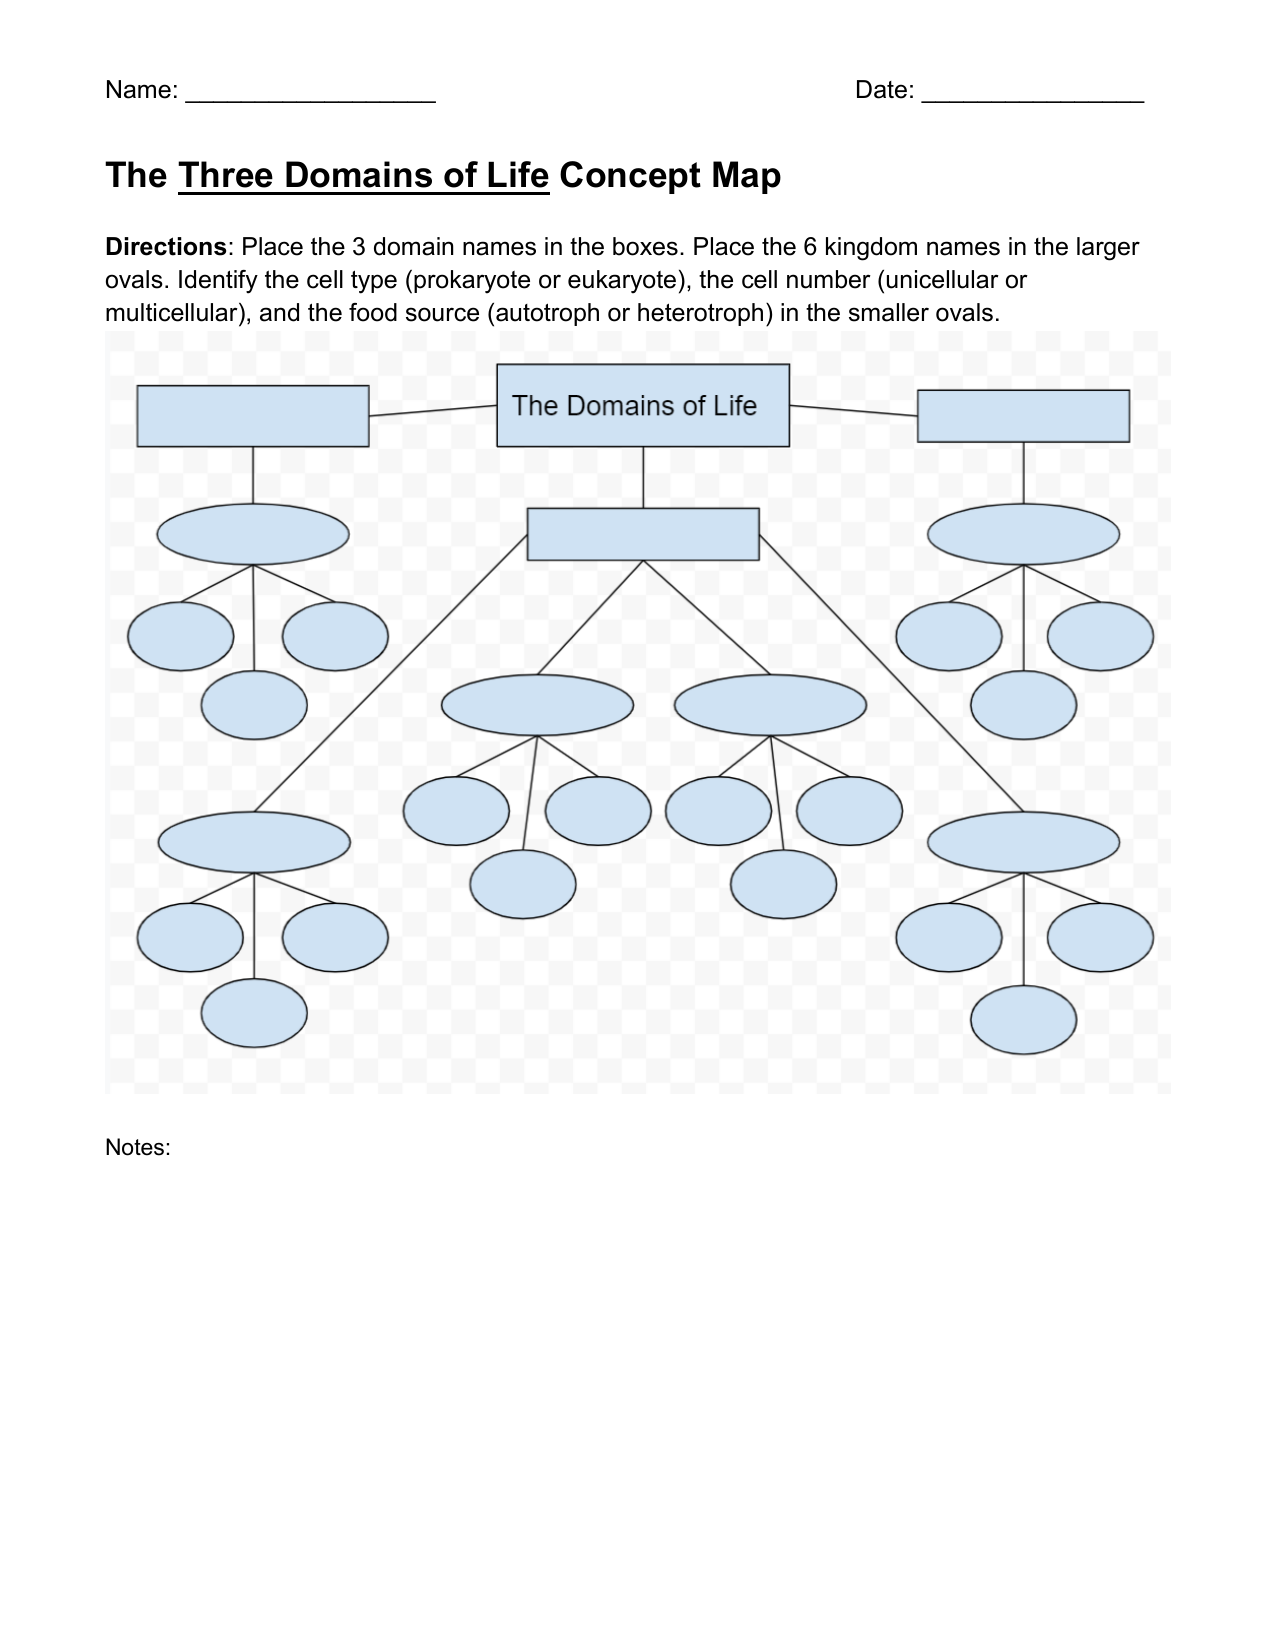 The Three Domains Mind Map With Domains And Kingdoms Worksheet